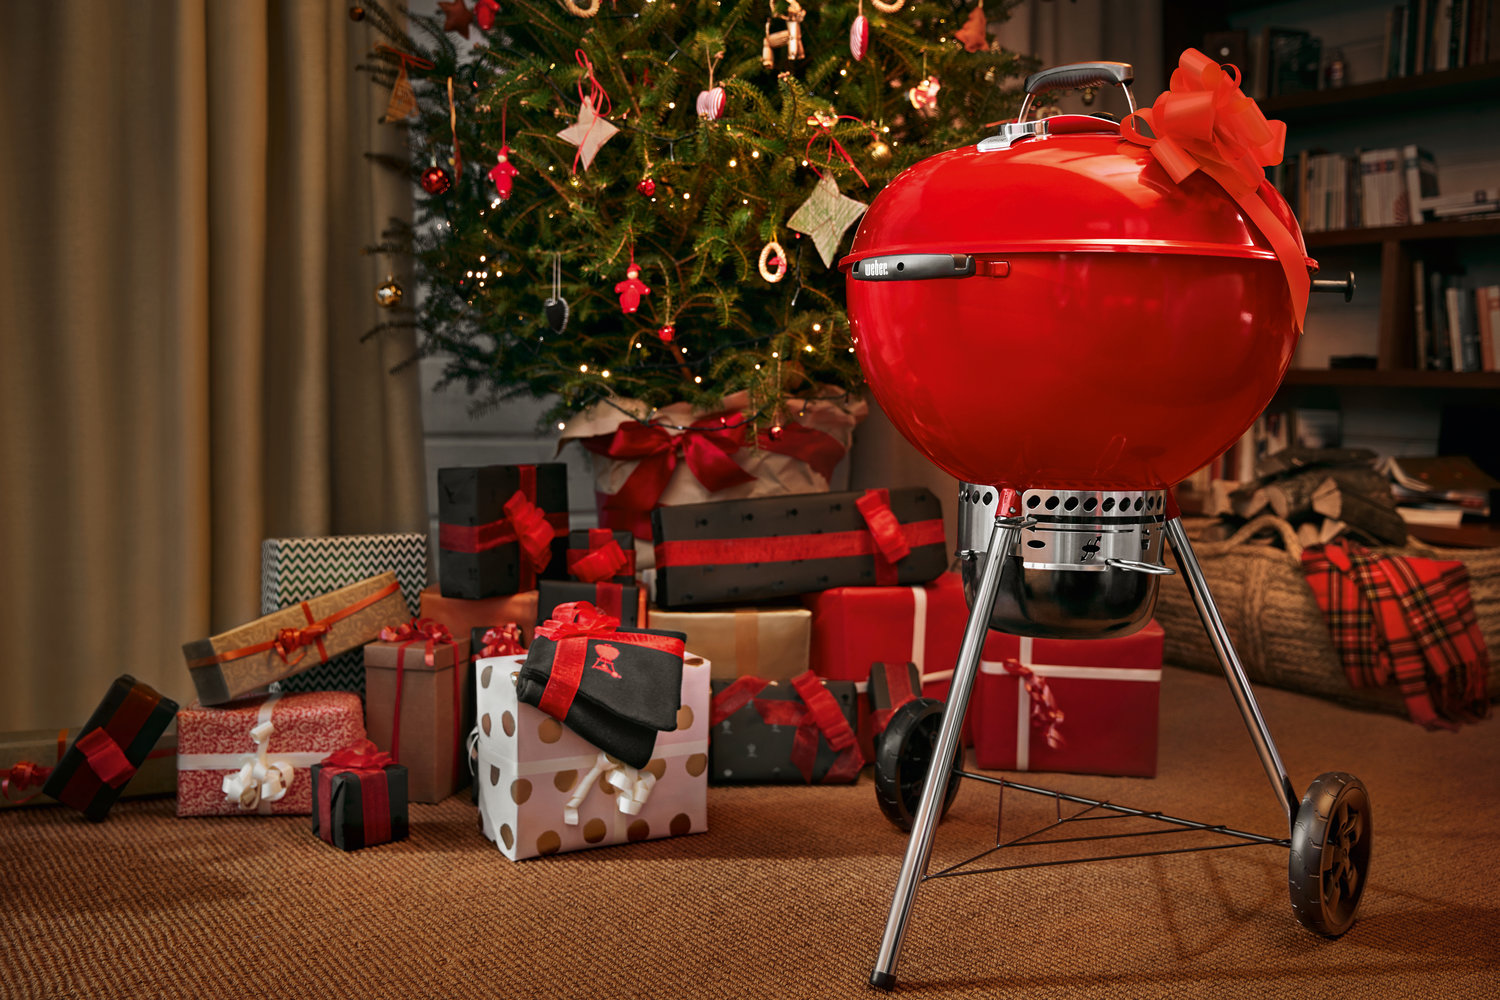 The Ultimate BBQ Gift Guide For The Holidays